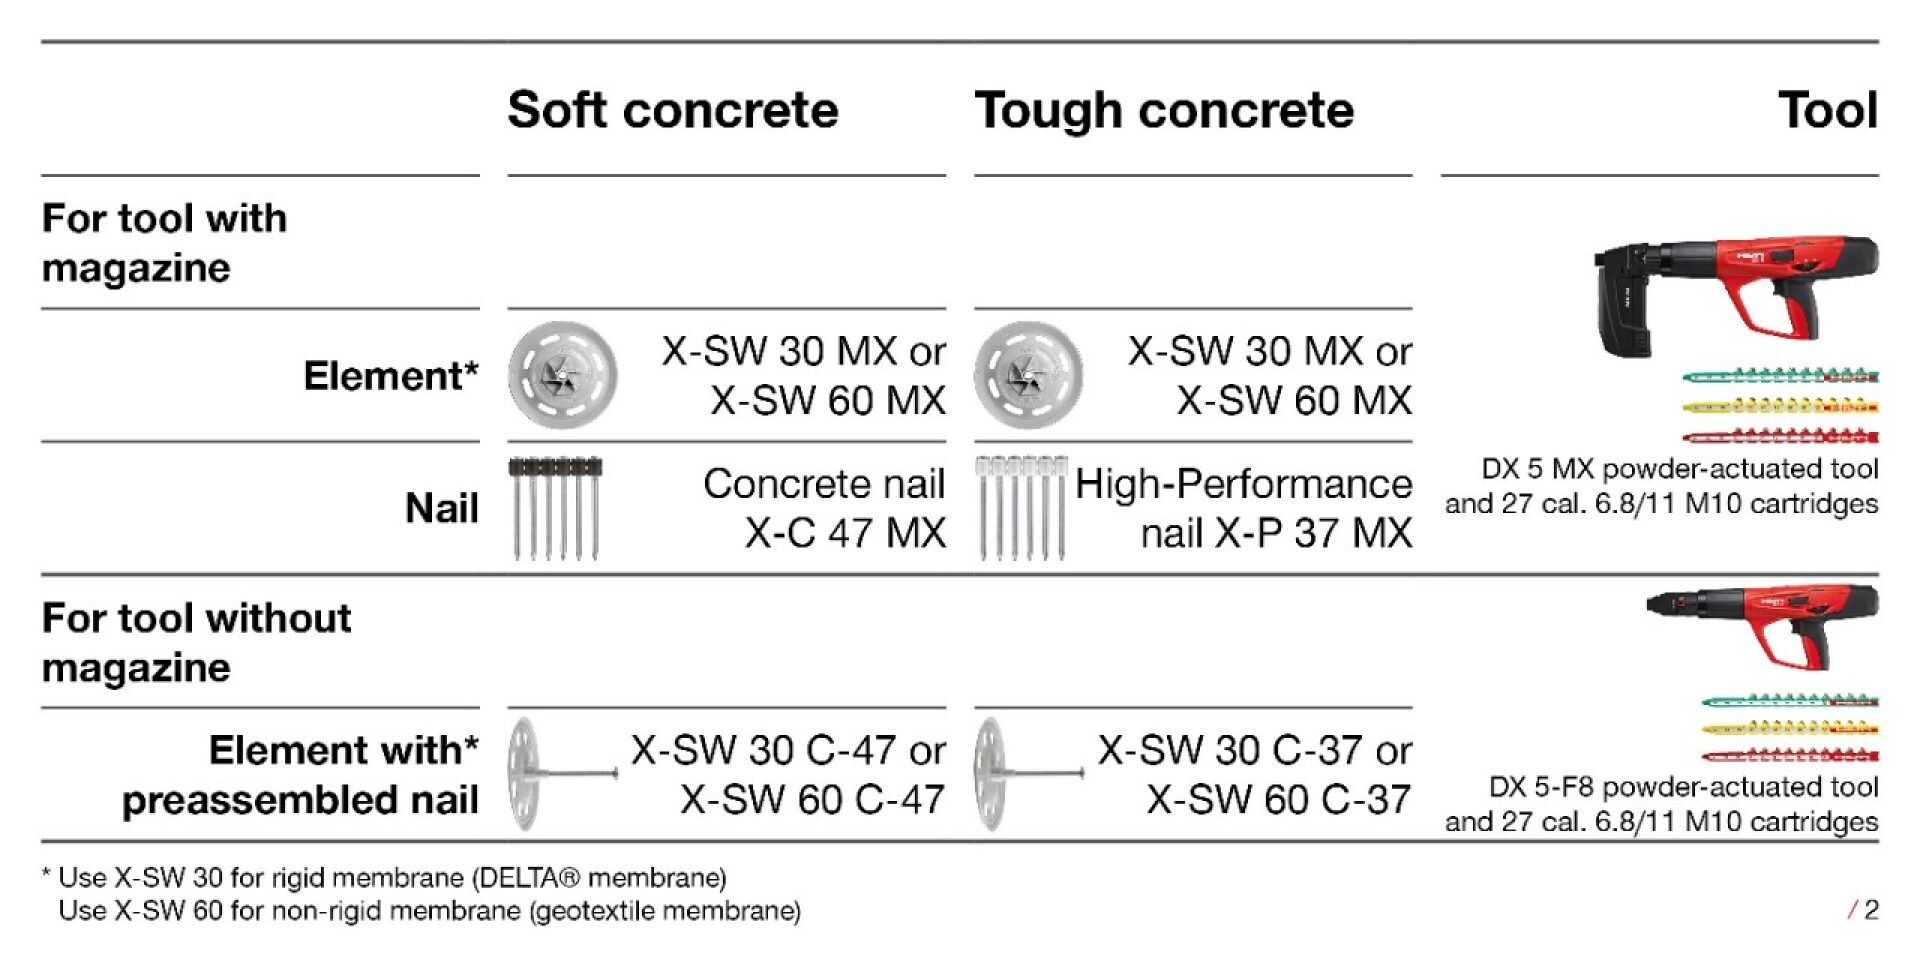 Concrete nail, fastening tool and washer selector for tough and soft concrete